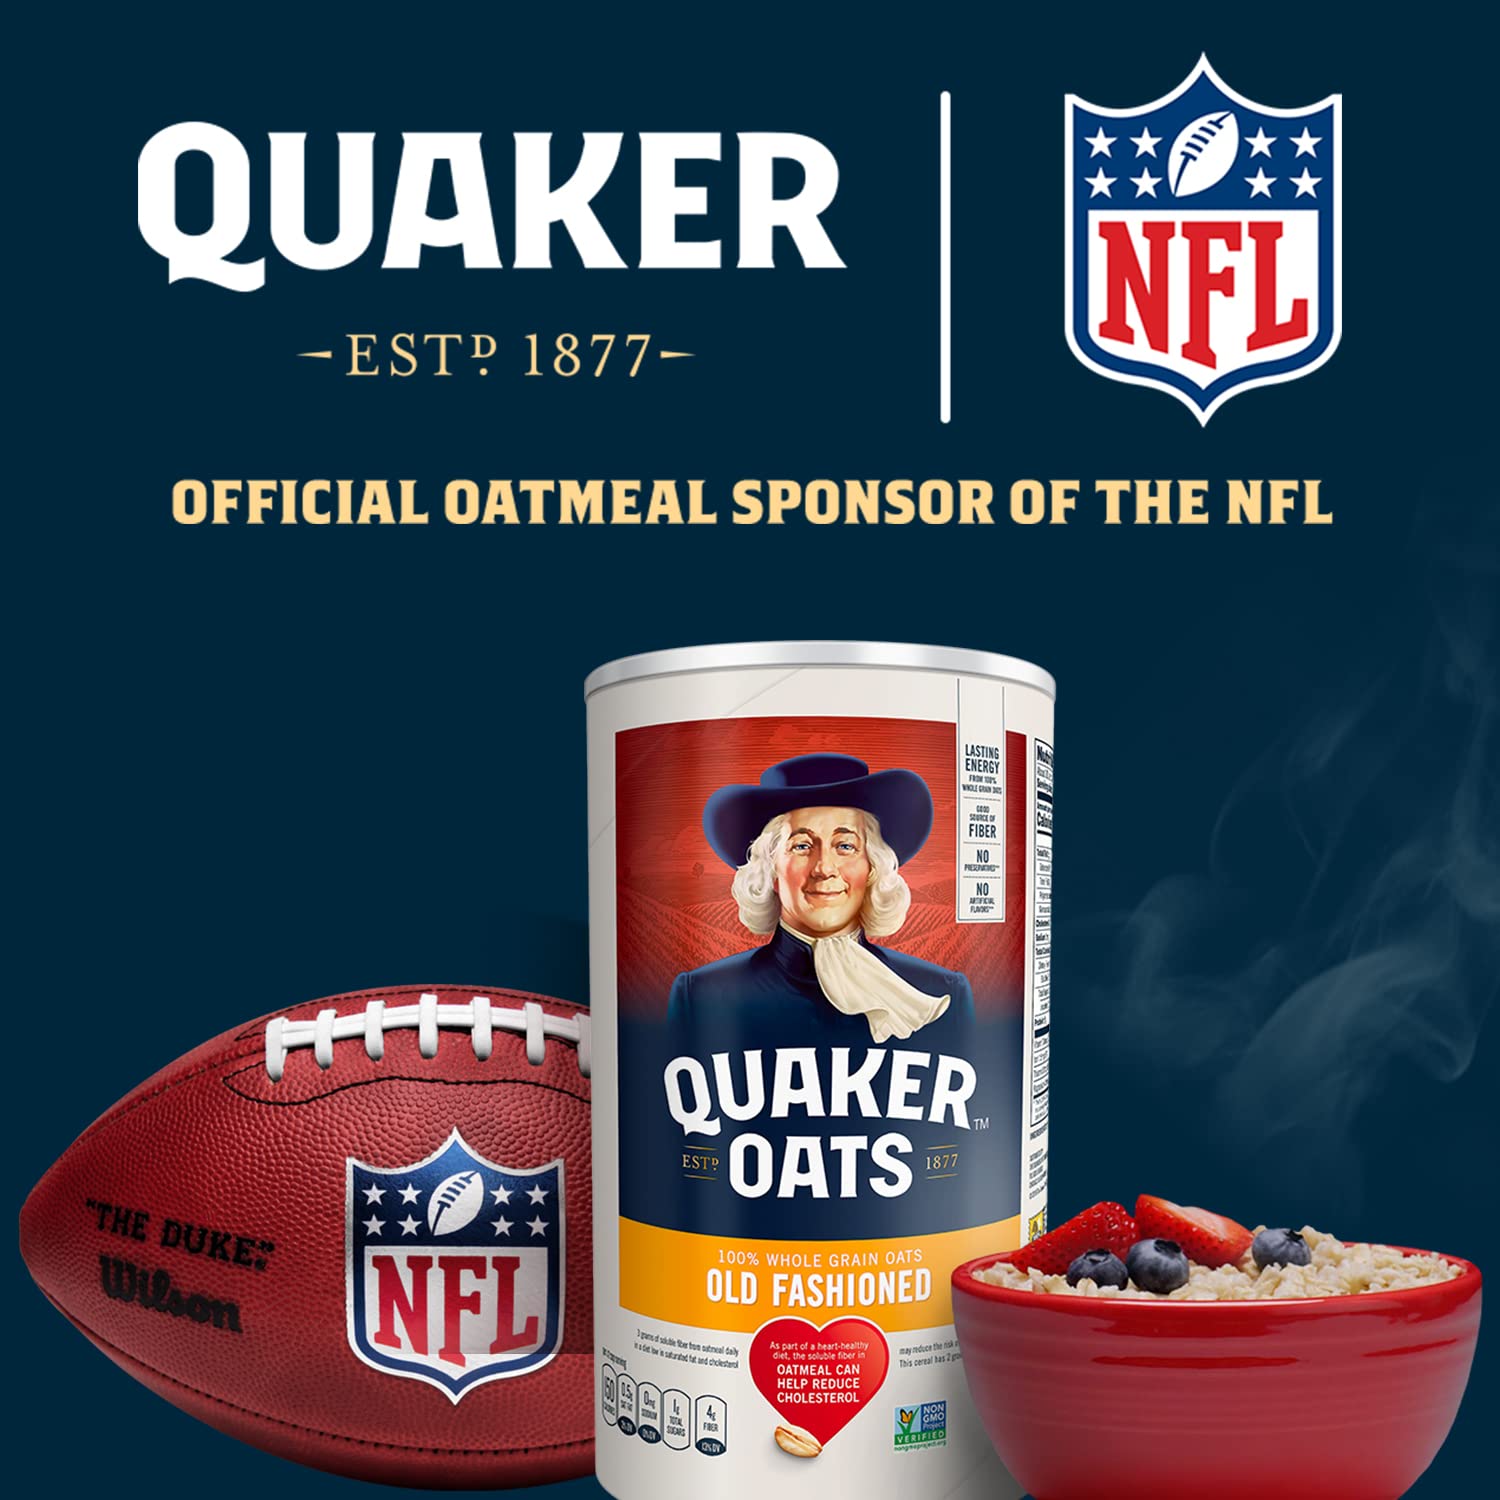 https://bigbigmart.com/wp-content/uploads/2021/10/Quaker-Old-Fashioned-Rolled-Oats-Old-Fashioned-Two-64oz-Bags-in-Box6.jpg